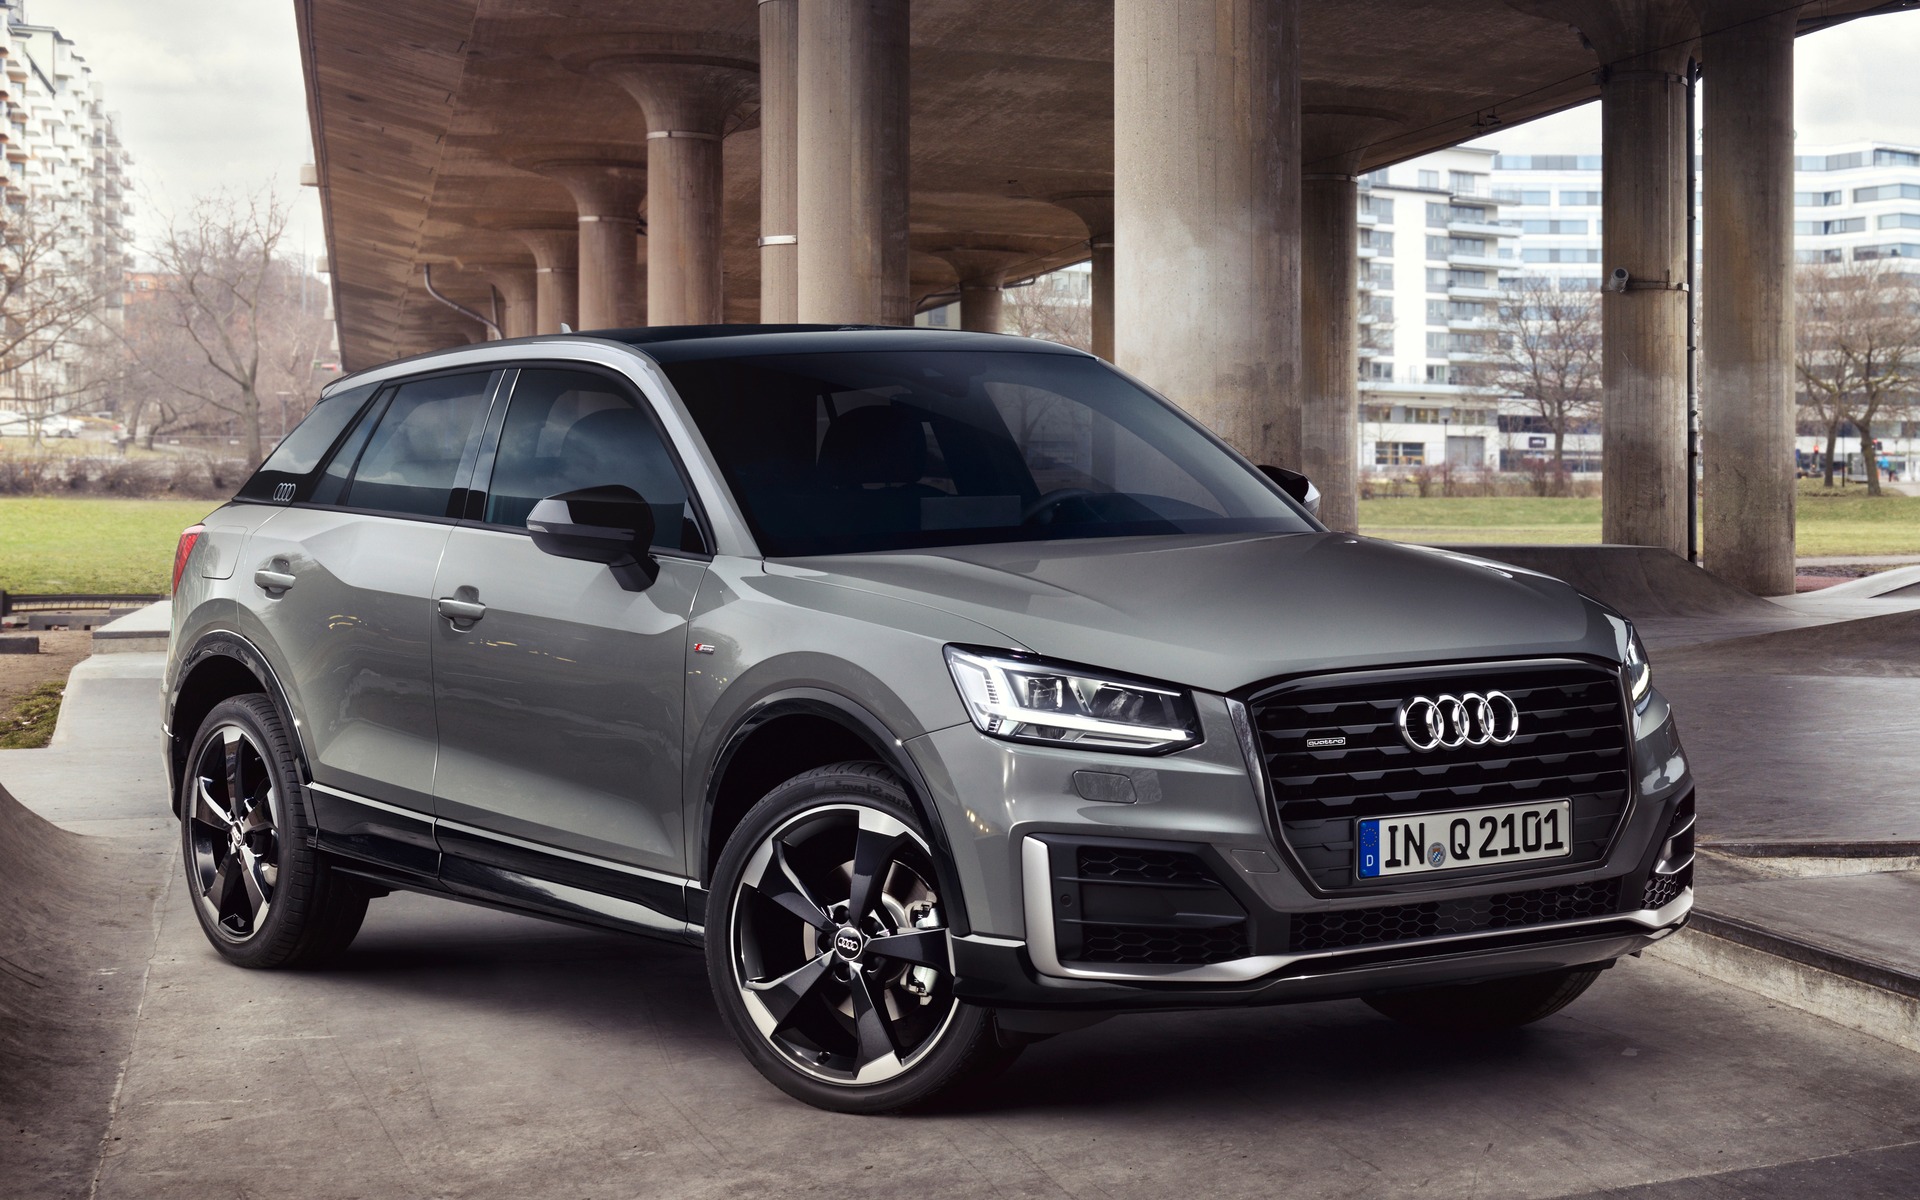 Audi Q2 to be Discontinued?